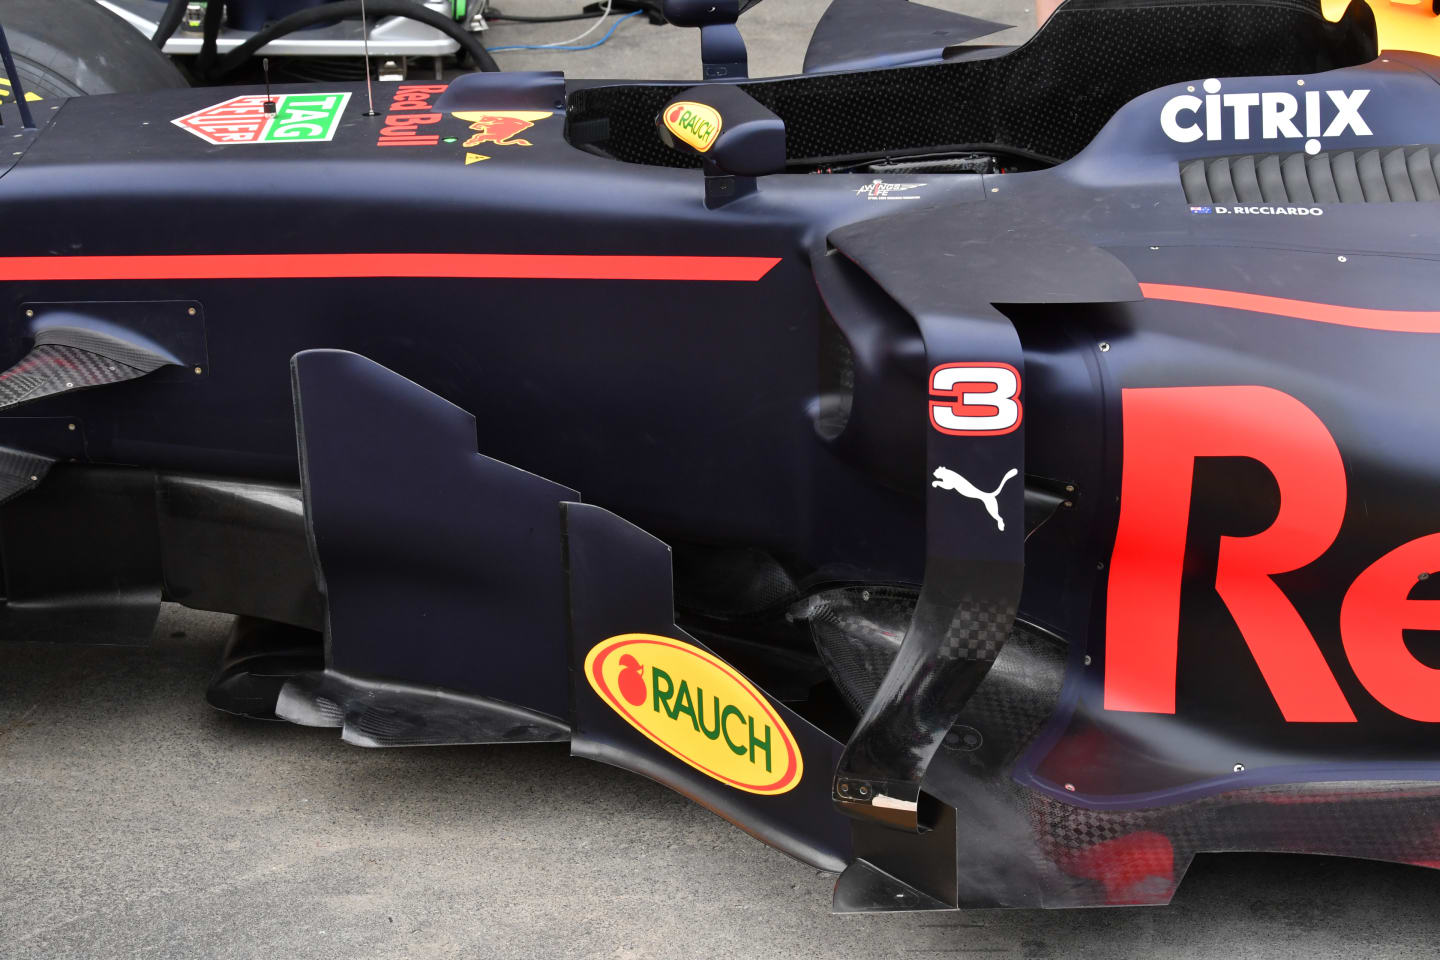 www.sutton-images.com

Red Bull Racing RB13 sidepod detail at Formula One World Championship, Rd1,